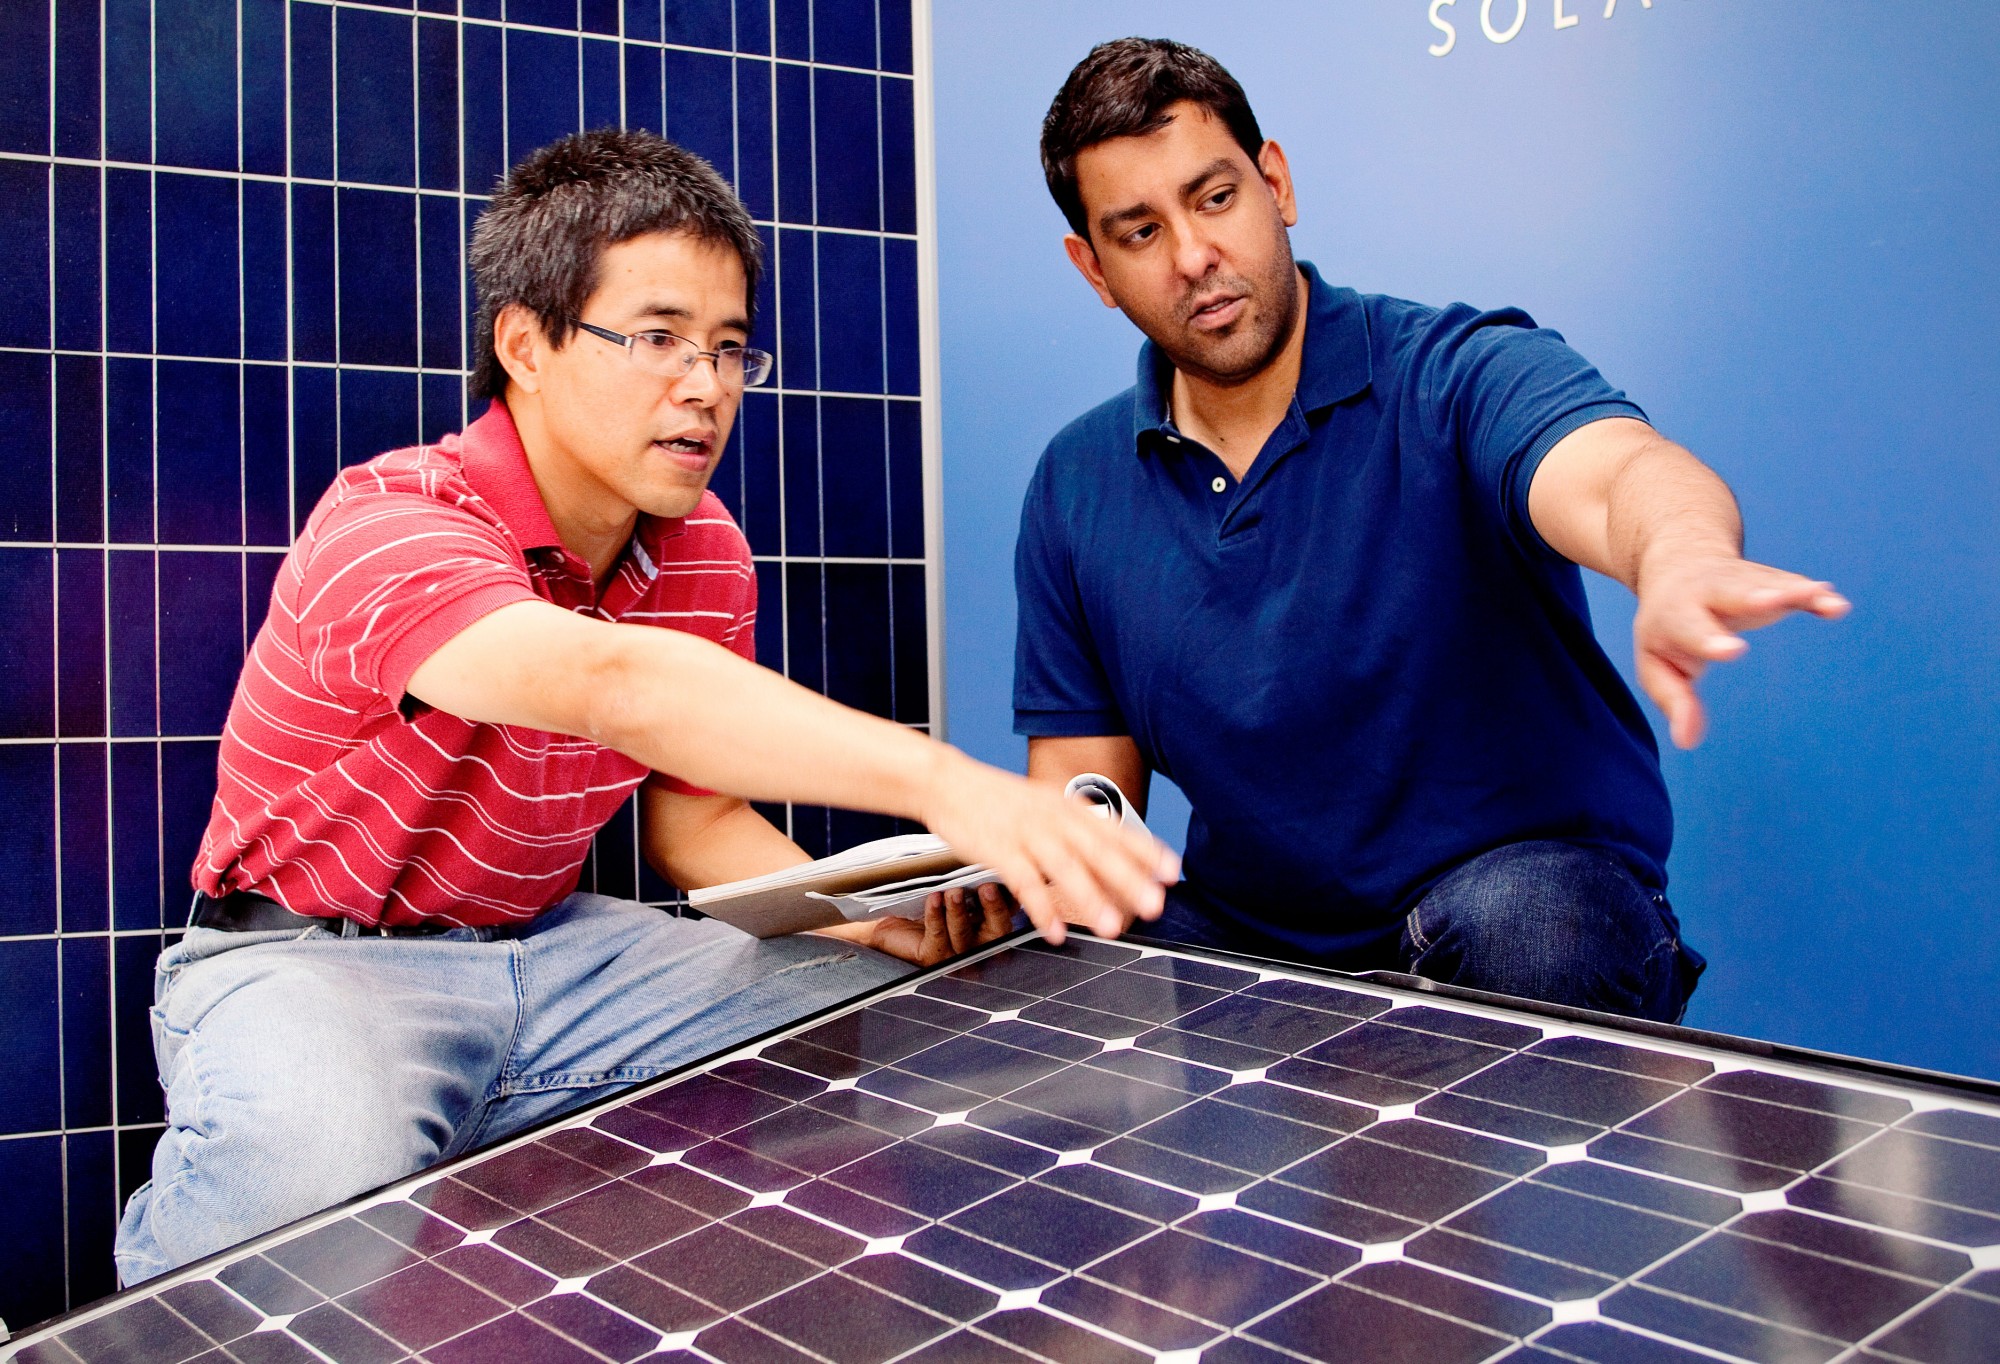 Engineering students discussing on solar panels.